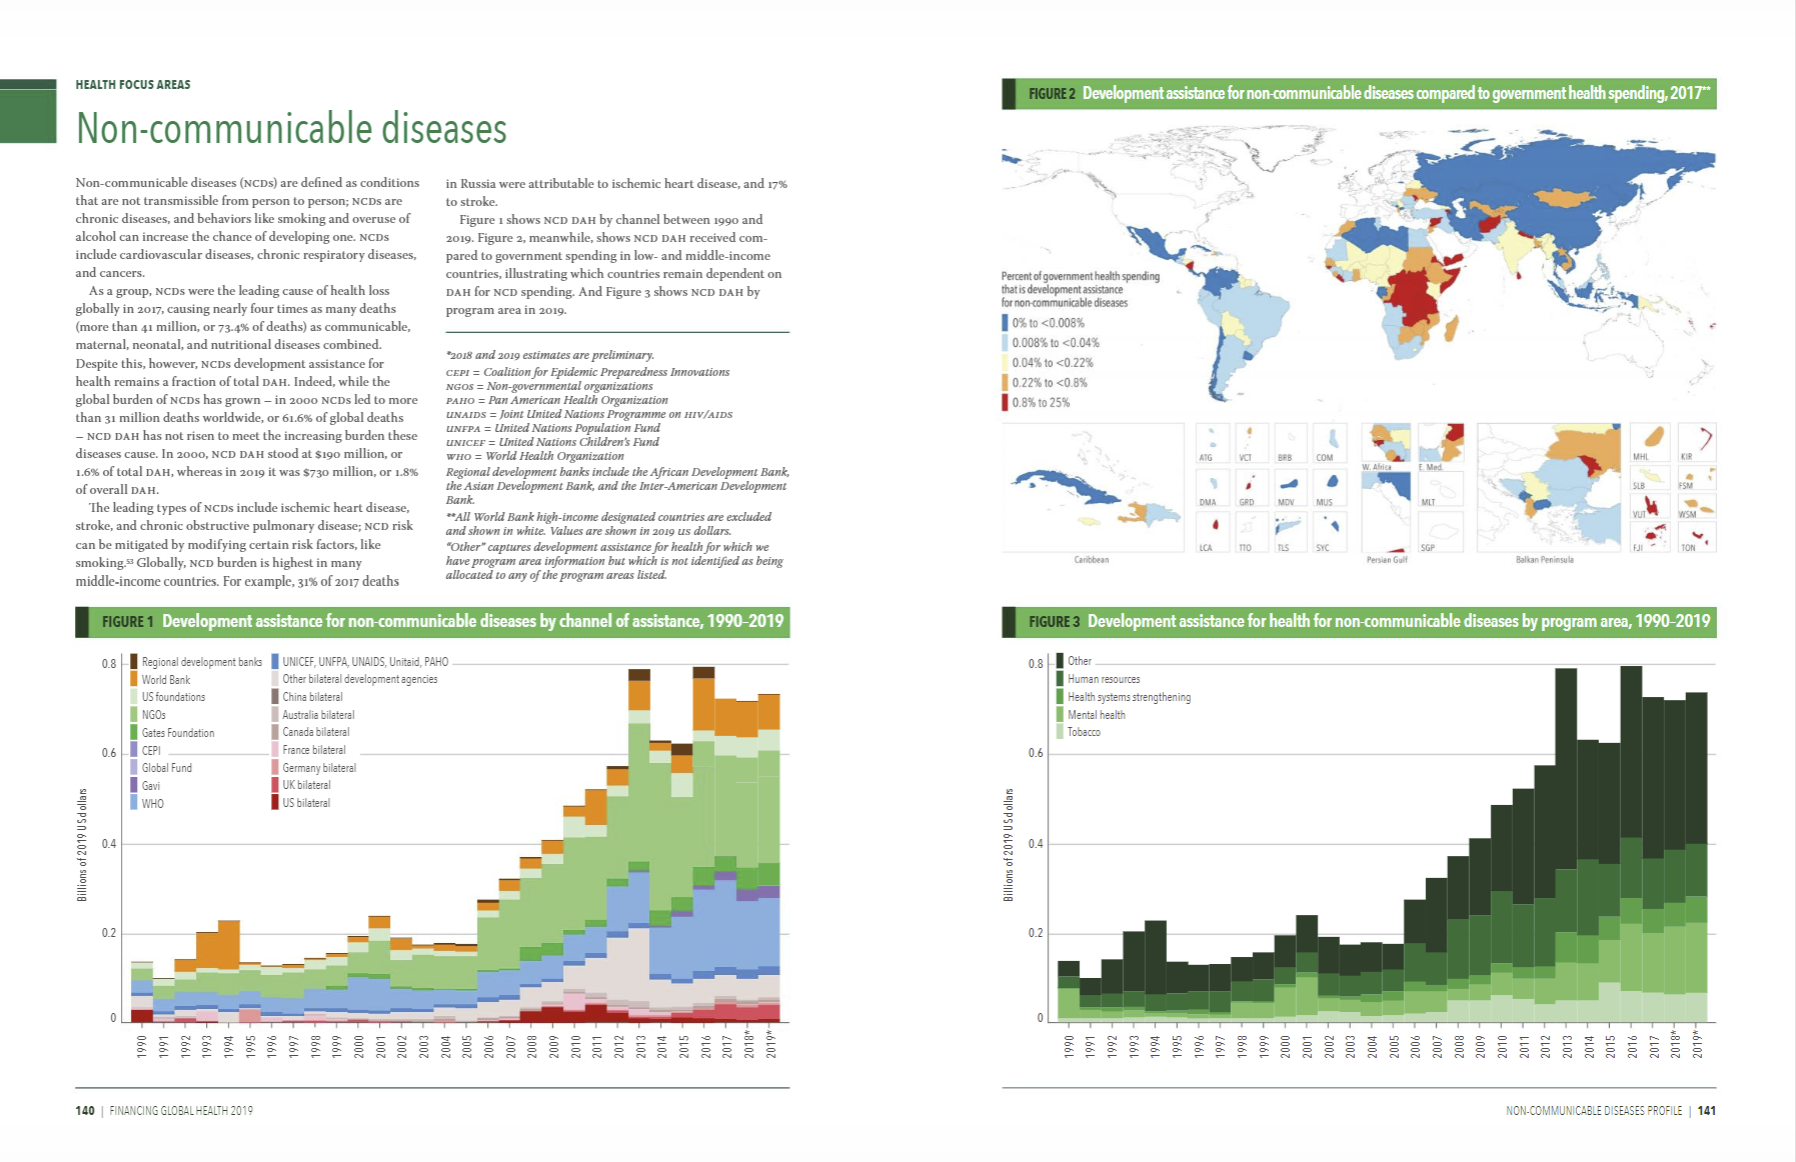 Pages from Financing Global Health Report on non-communicable diseases